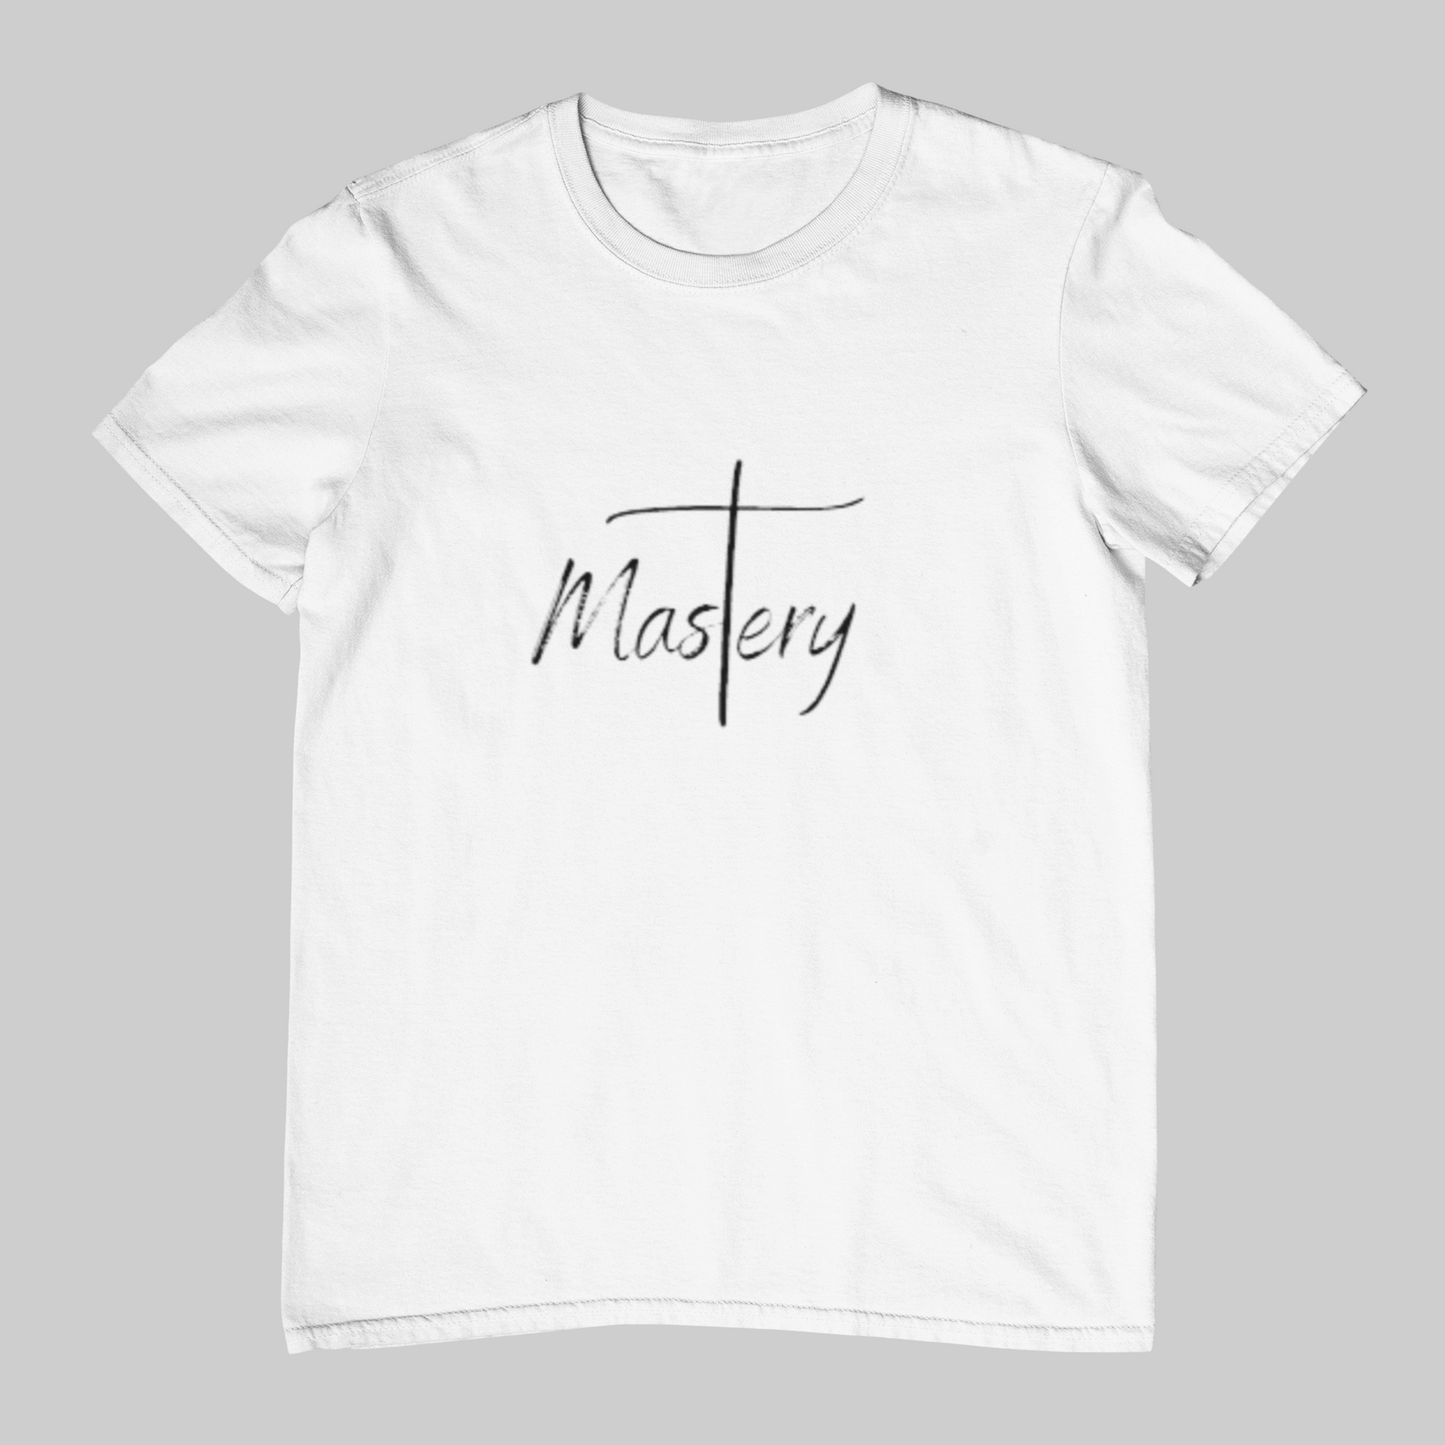 Mastery T-Shirt Unisex (Black or White) - Beyond The Walls Int'l